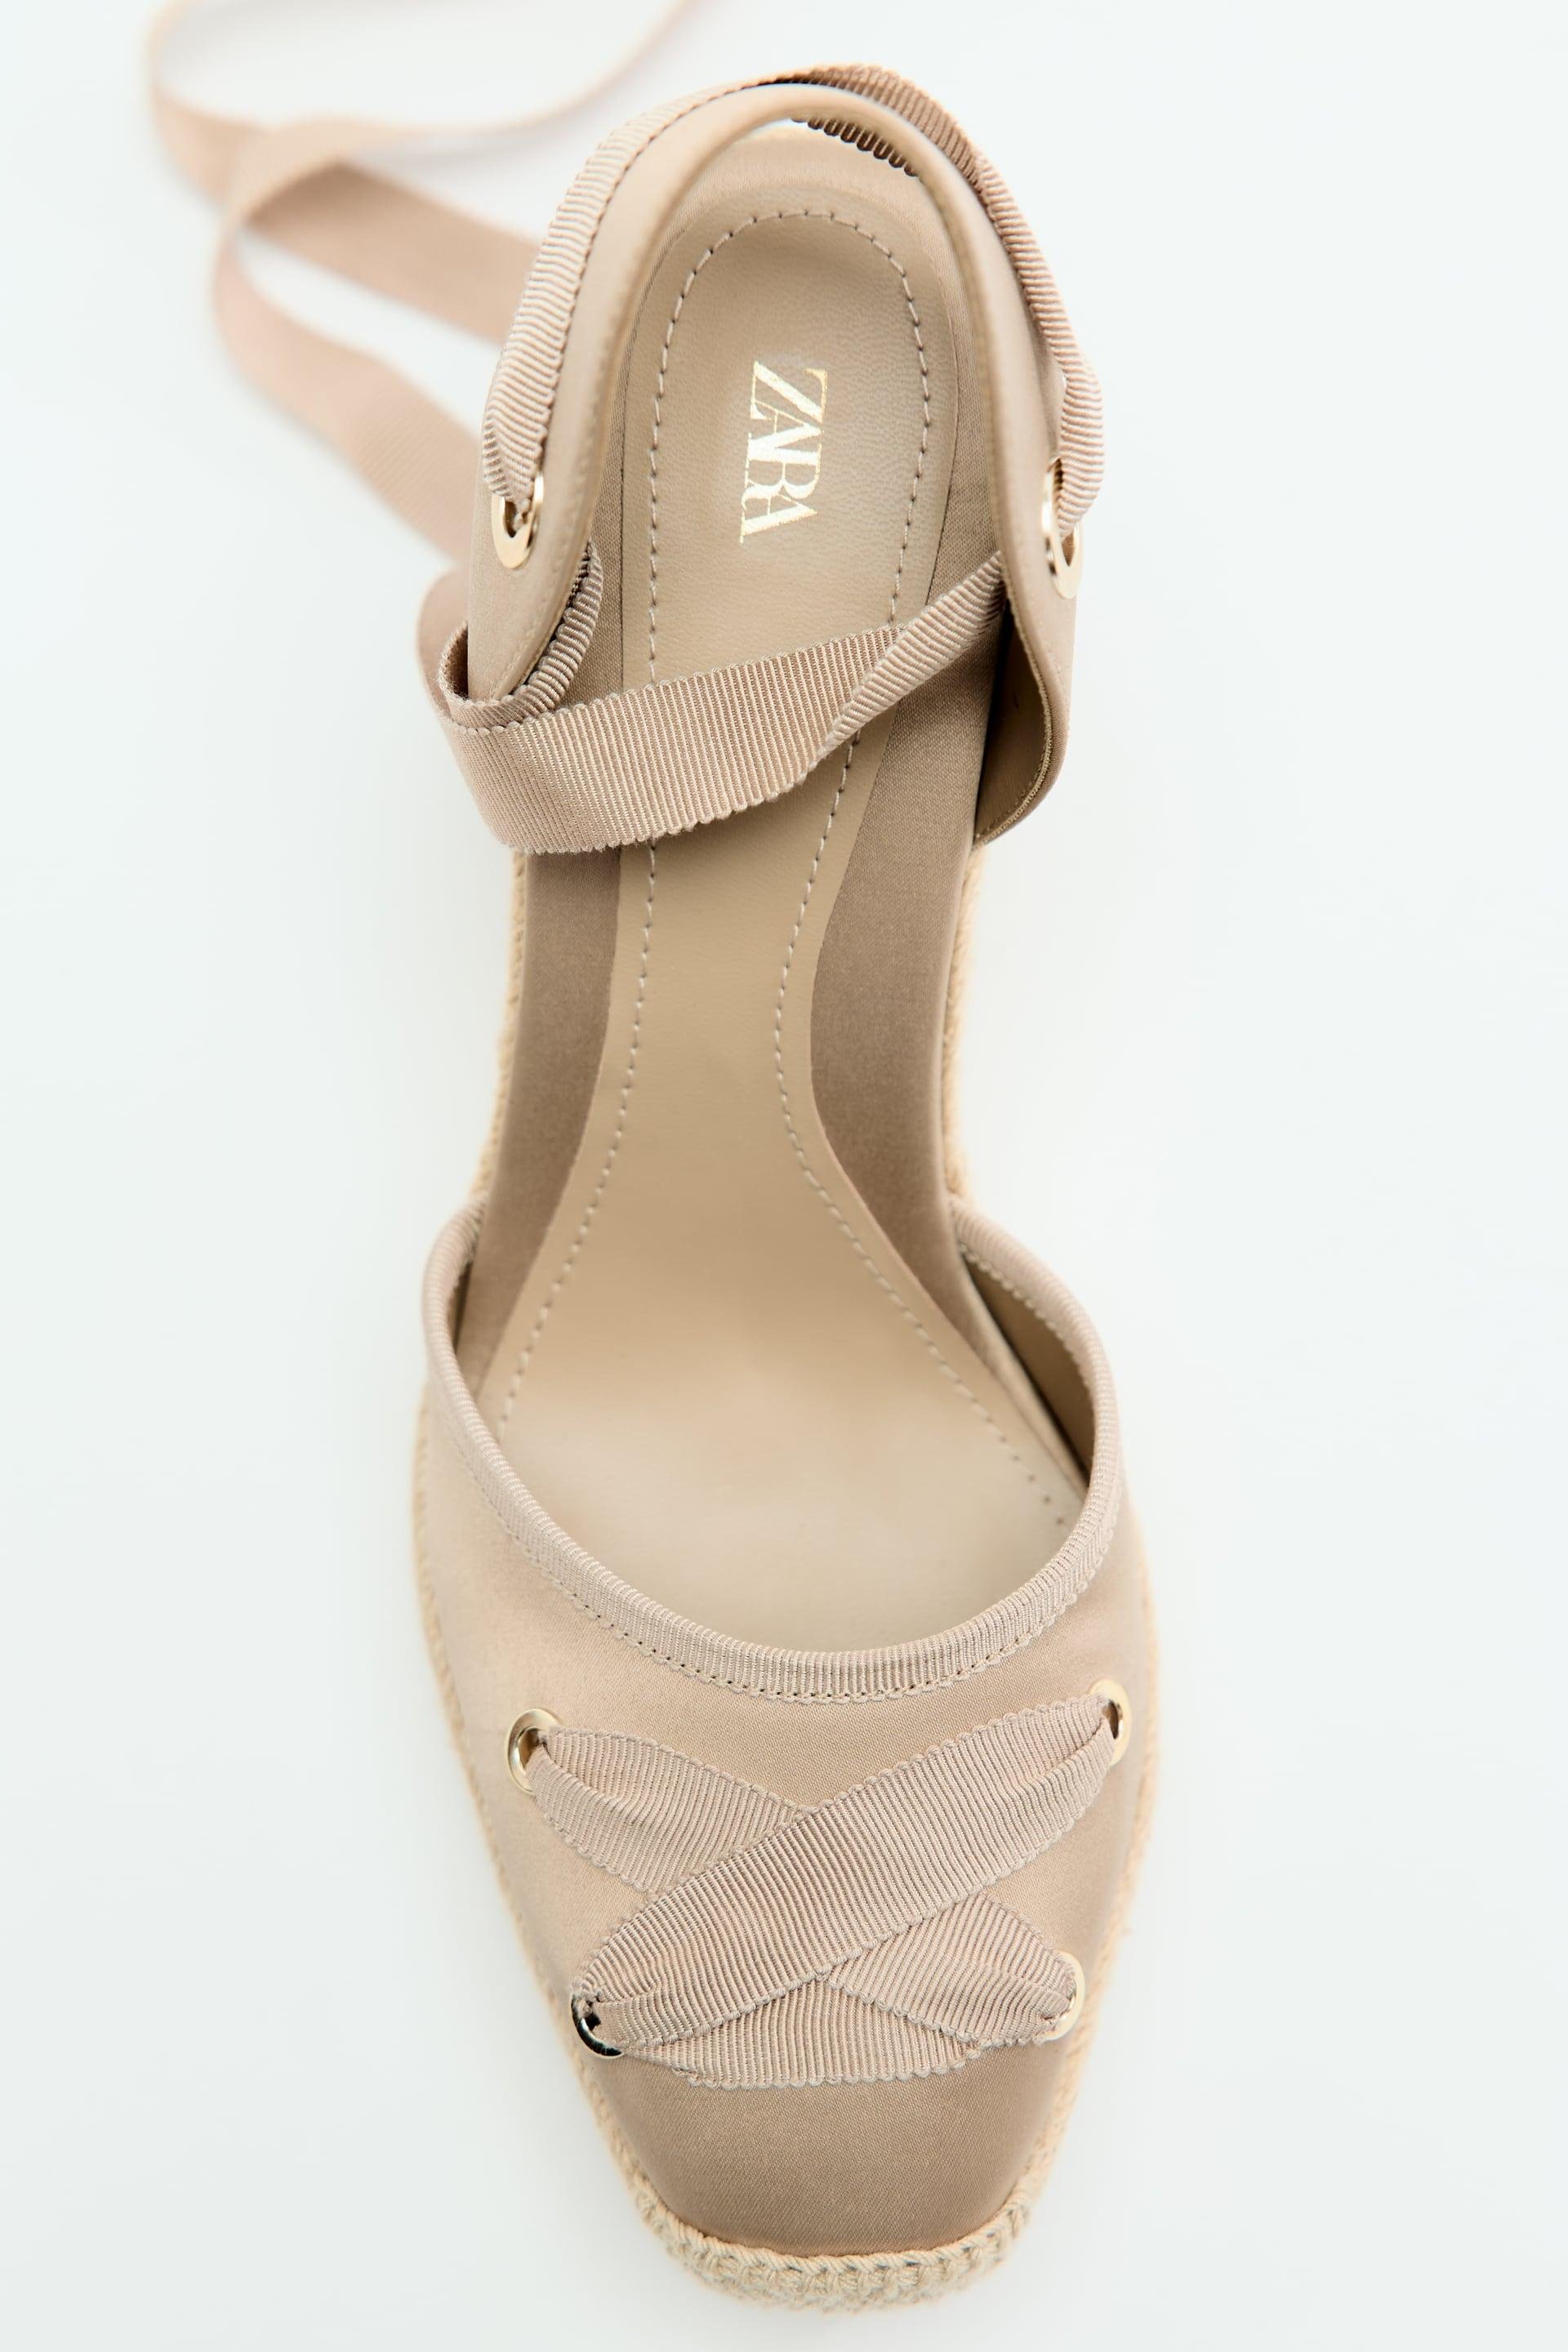 LACE-UP FABRIC WEDGES by ZARA